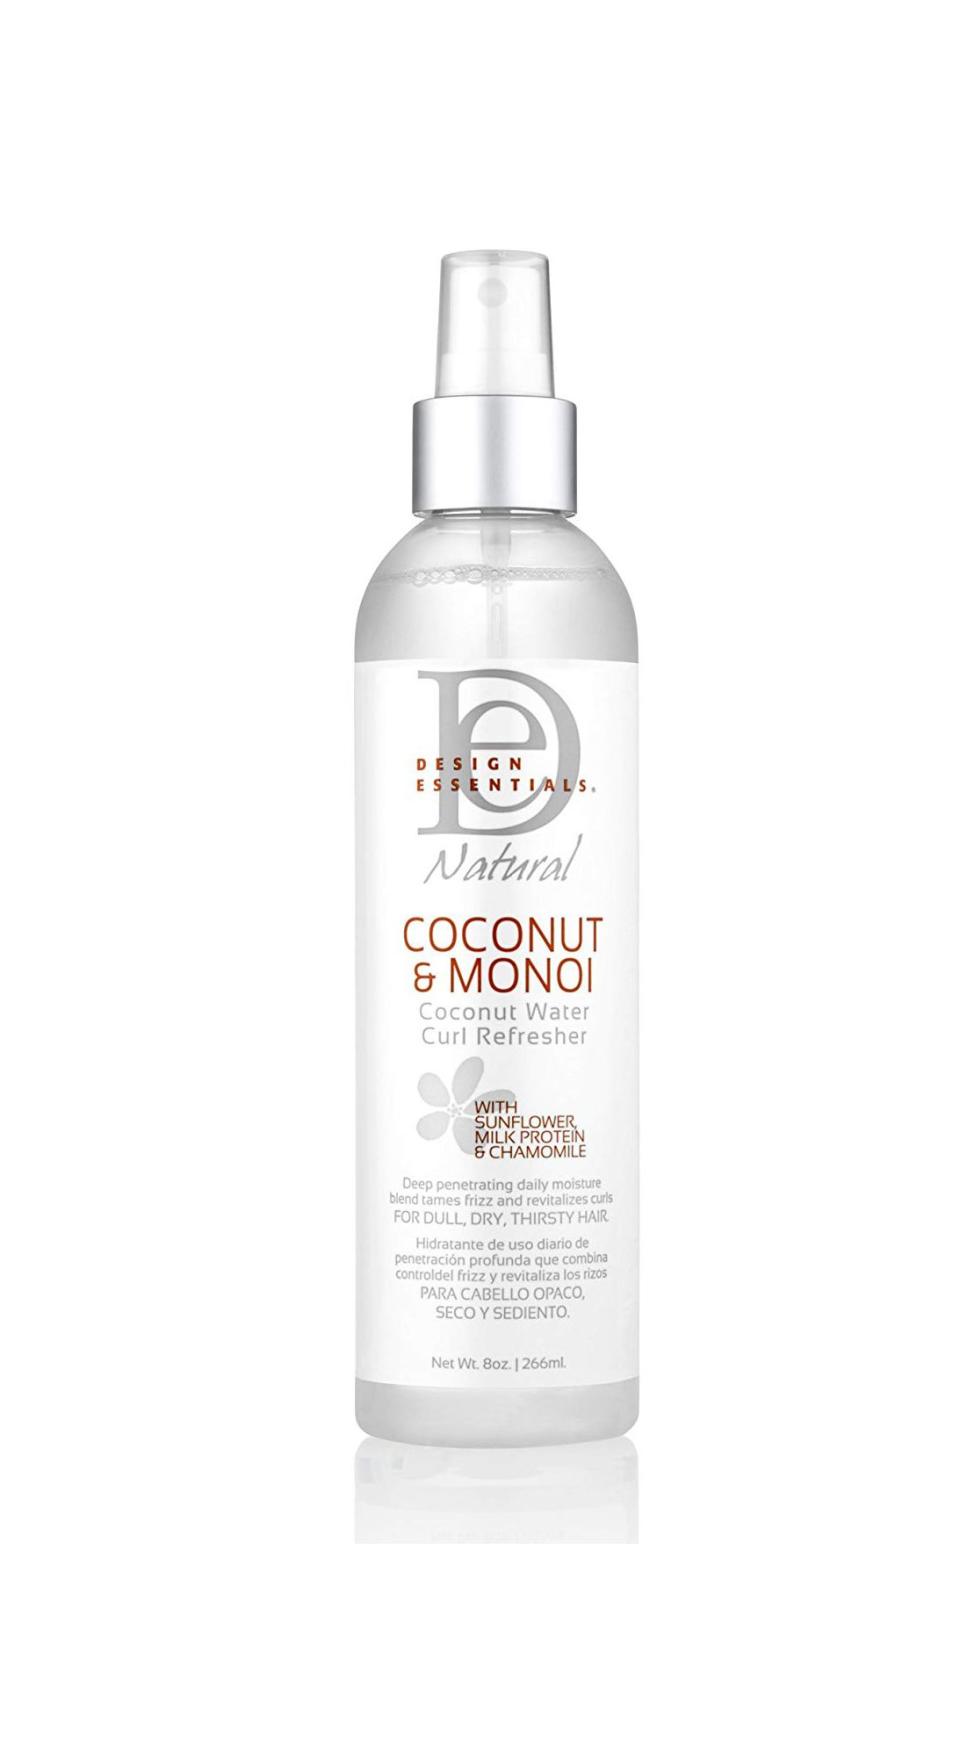 Coconut Water Curl Refresher